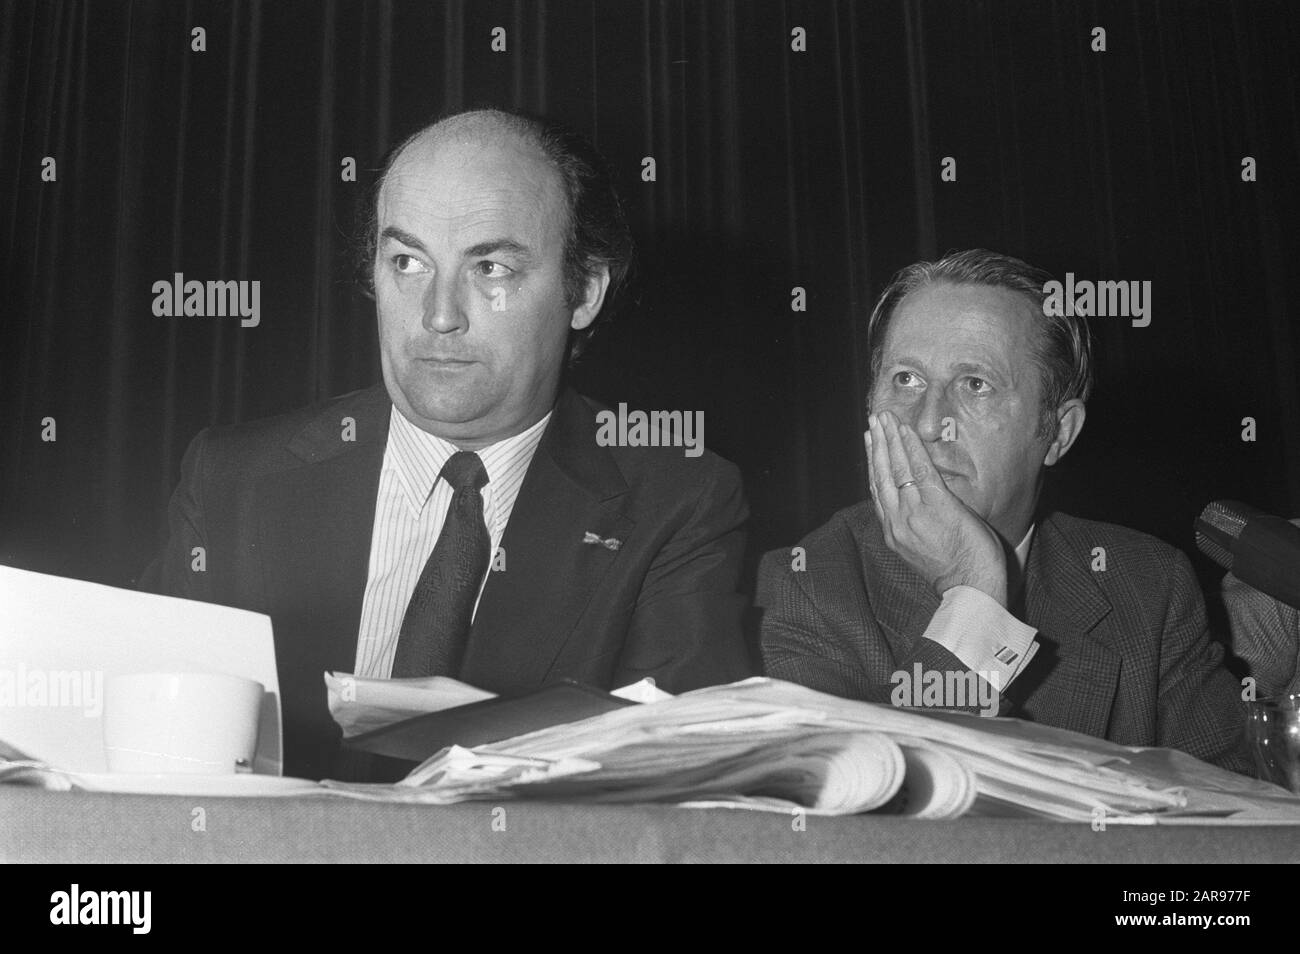 Assembly of the ARP party council in Zwolle, Second Chamber of political group chairman Aantjes and party chairman Veerman (r) number 12 Van Es, Boersma and Grosheide/Date: 30 September 1972 Location: Overijssel, Zwolle Keywords: Meetings, group chairmen Institution name: ARP Stock Photo